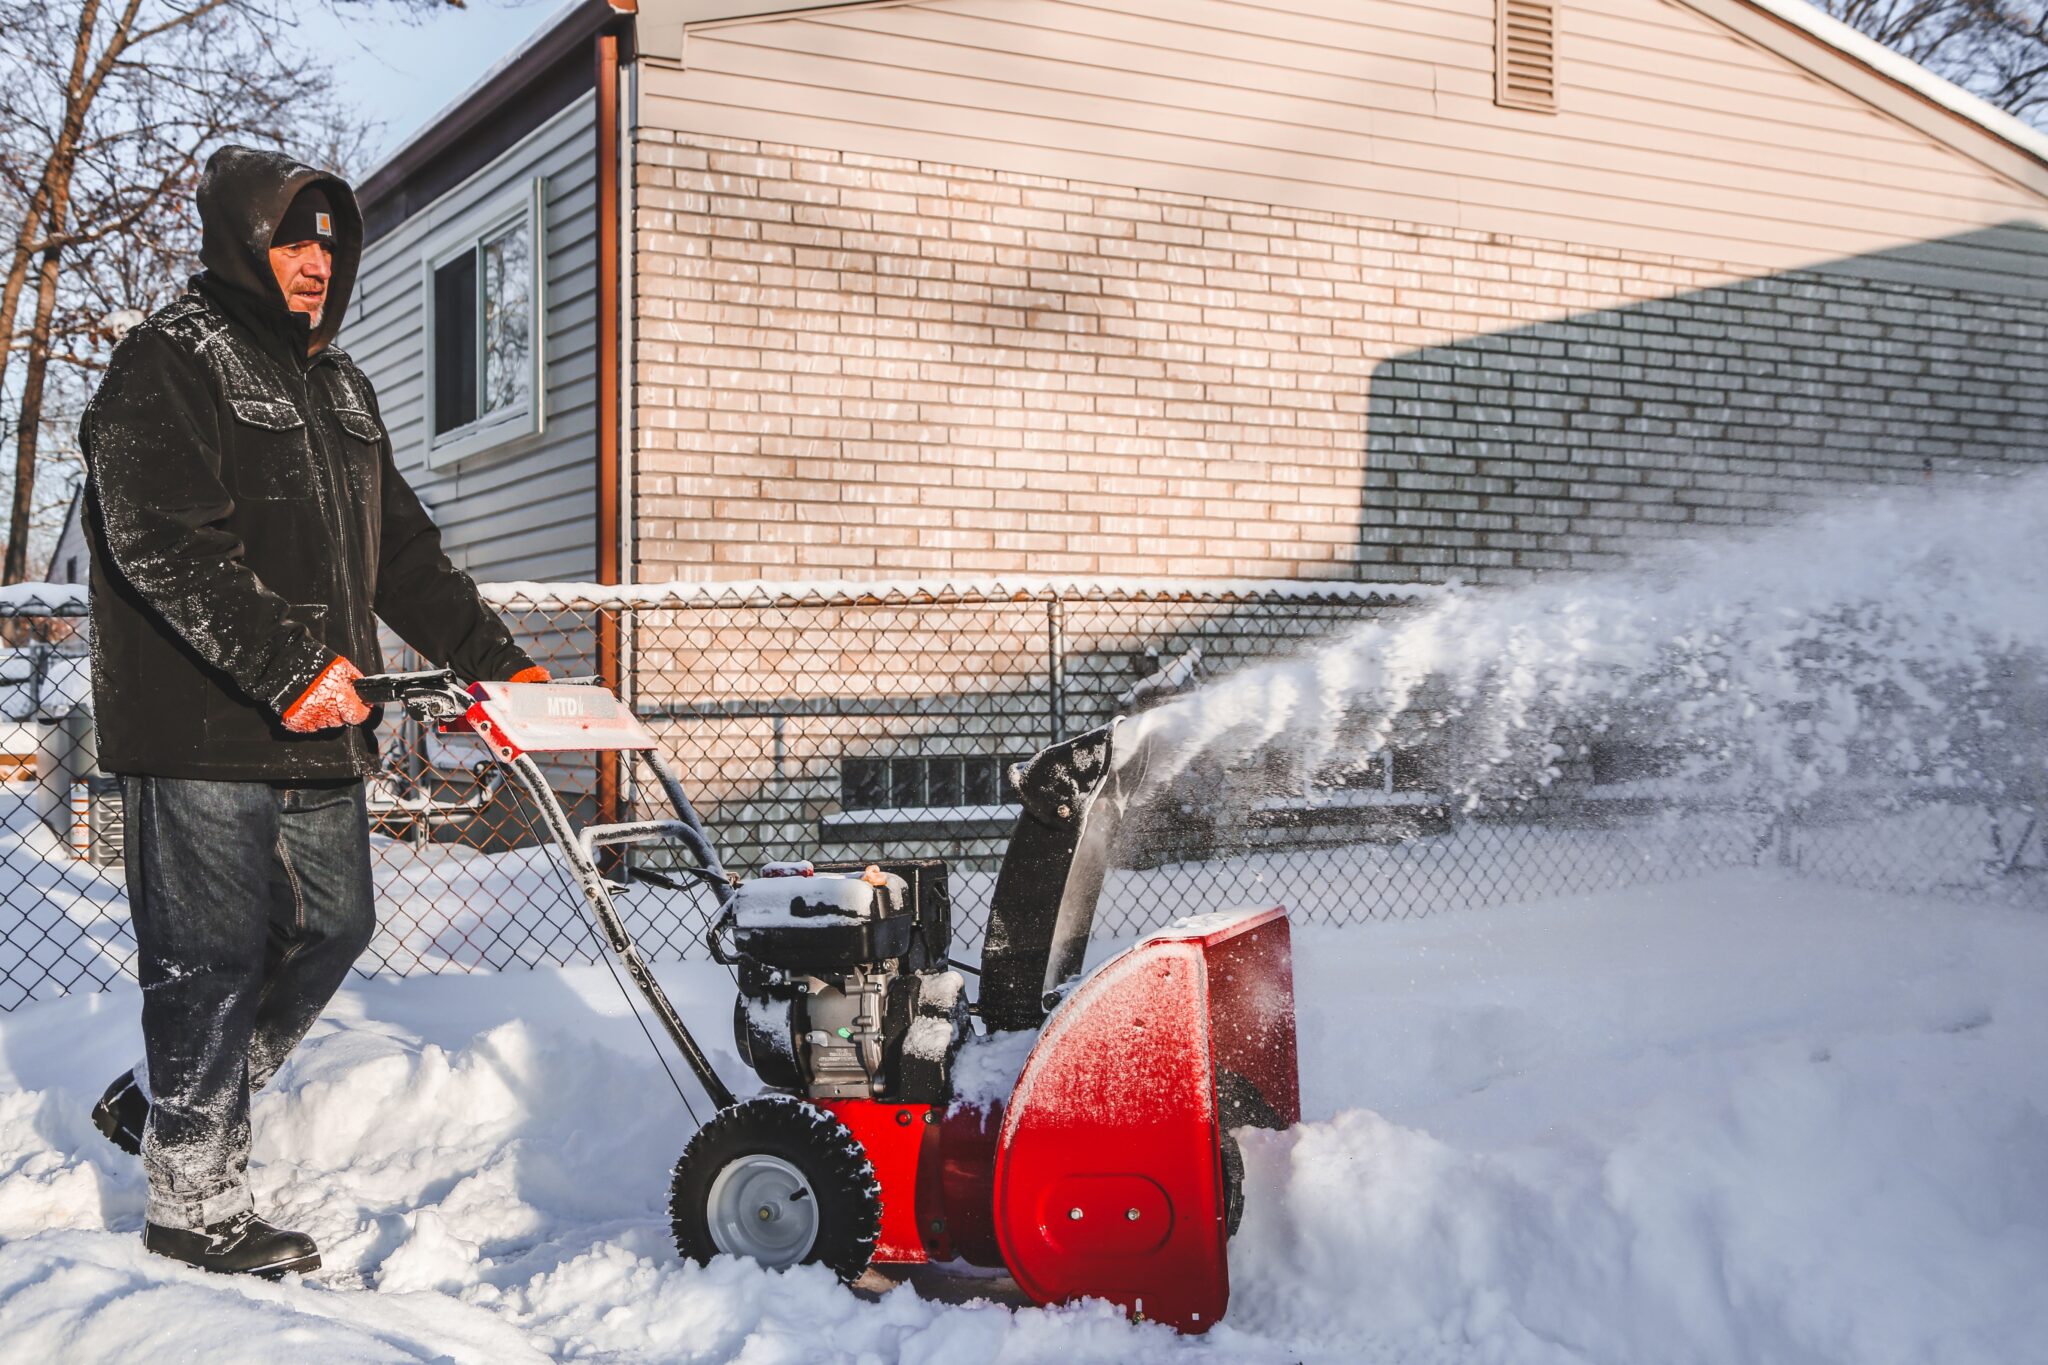 9 Best Snow Removal Tools for Home and Professional Use - Your Projects@OBN